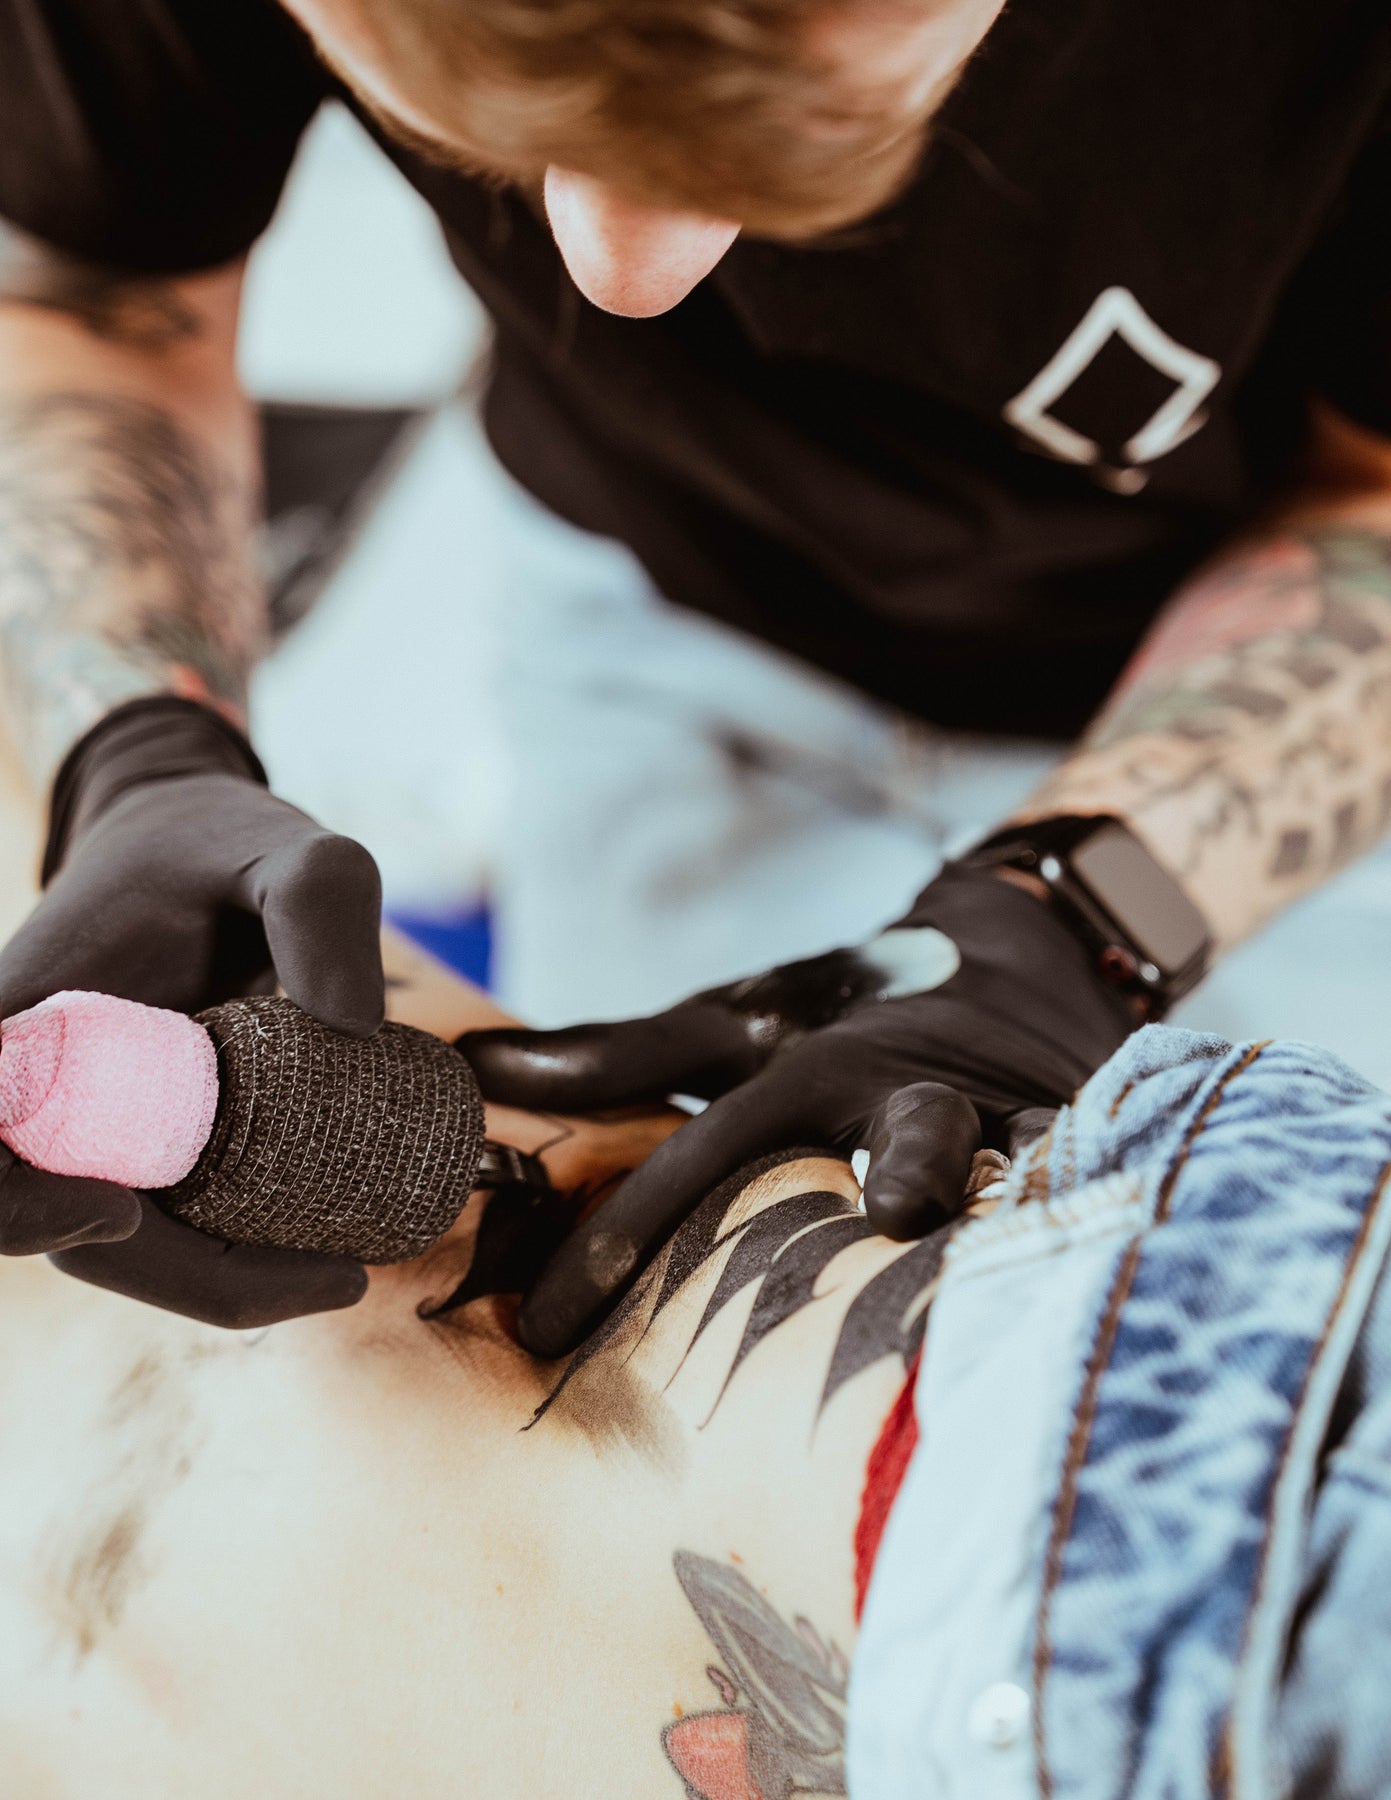 The Best Tattoo Numbing Products in the Industry  HUSH  Hush Anesthetic